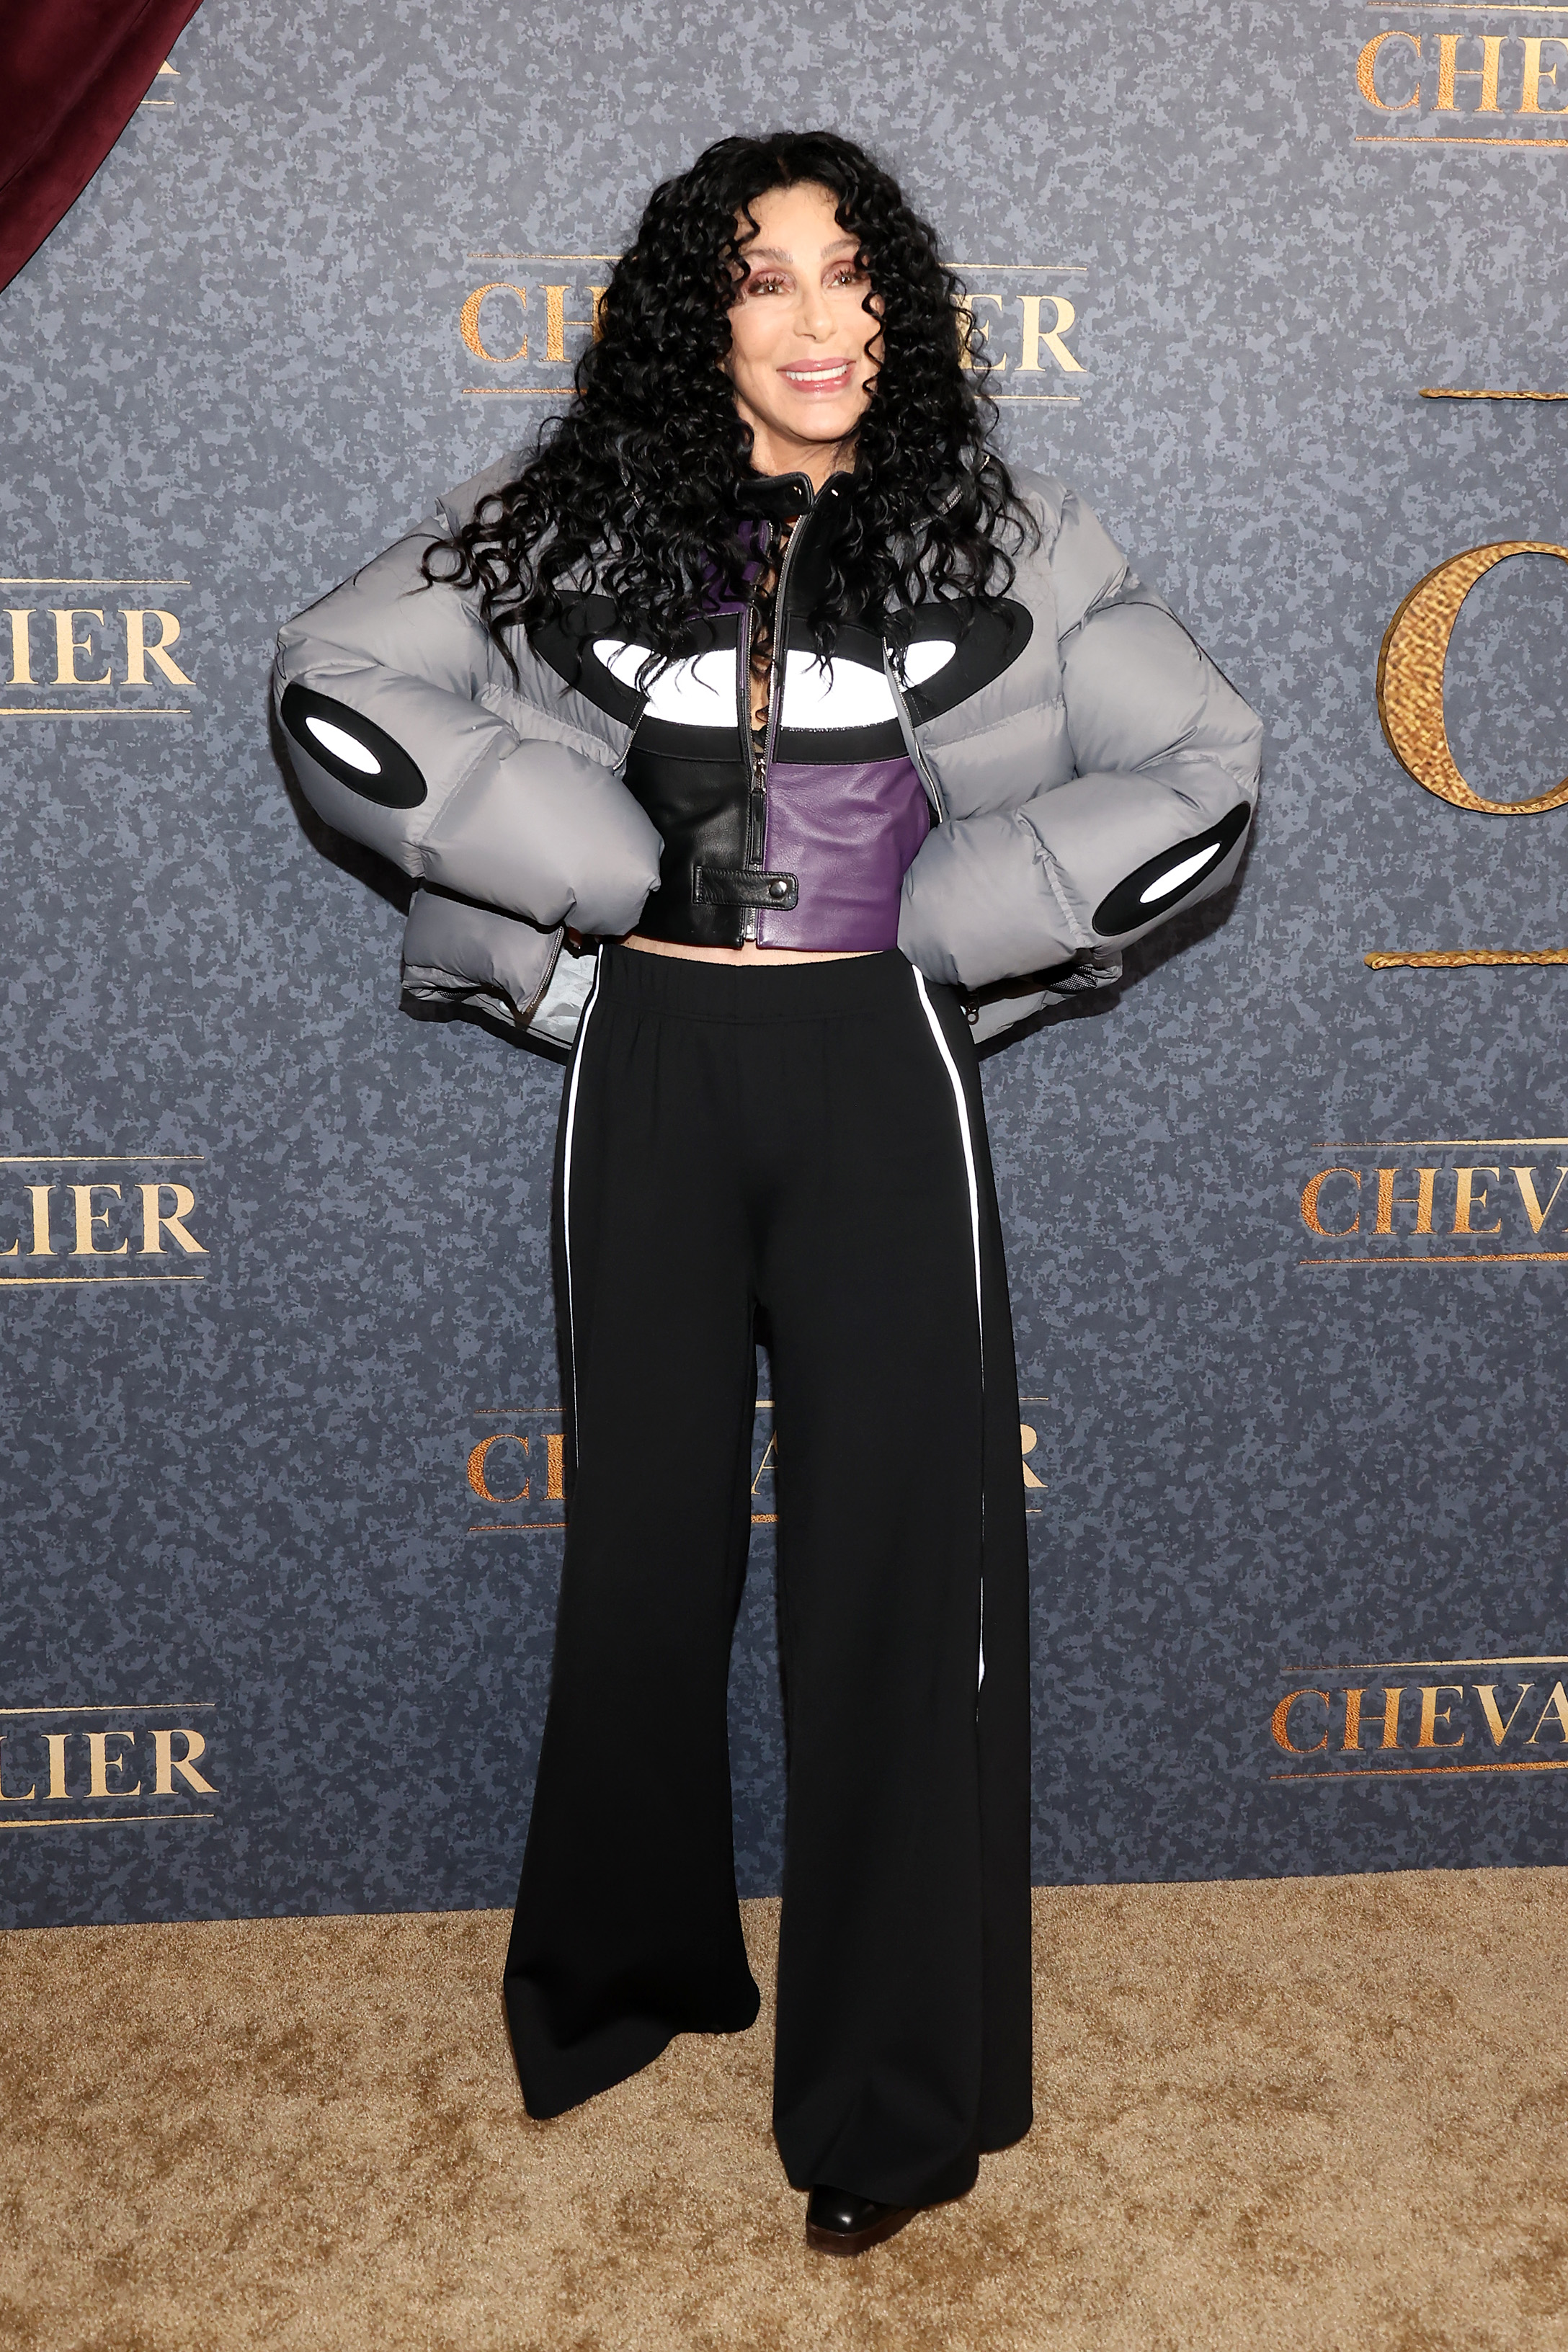 Cher attends the Los Angeles special screening of "Chevalier" at El Capitan Theatre on April 16, 2023 in Los Angeles, California. | Source: Getty Images